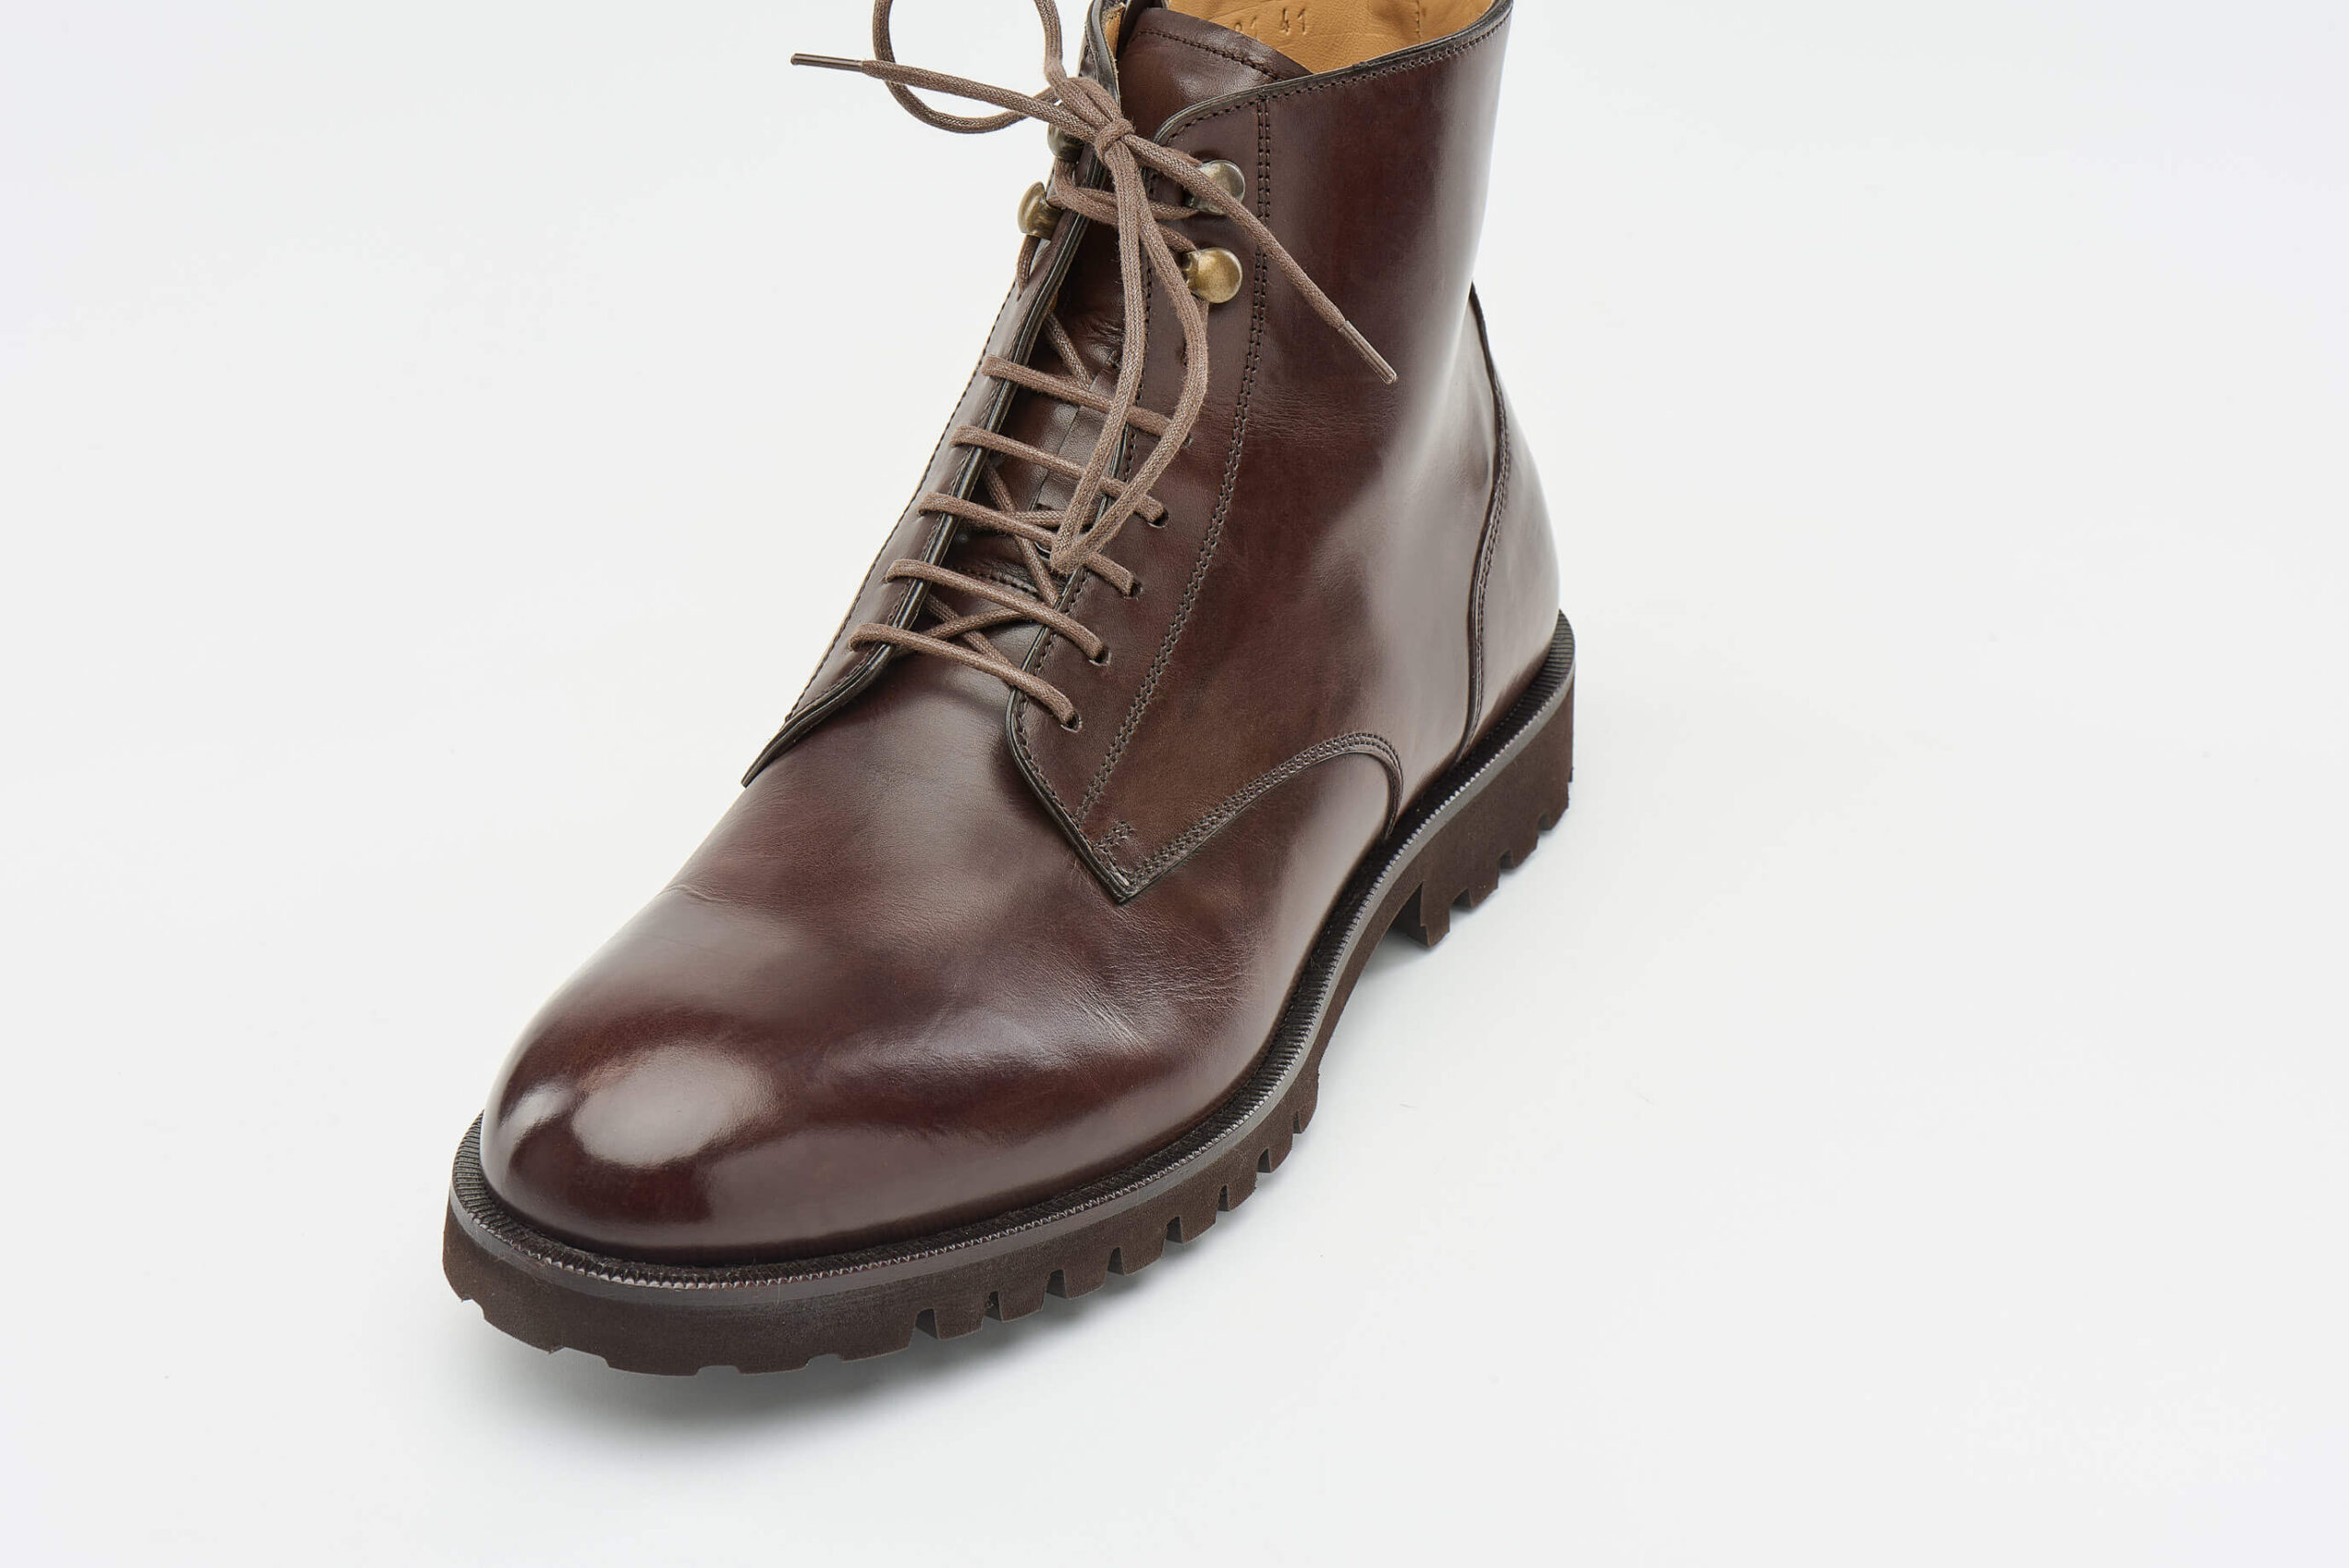 Luis Onofre Portuguese Shoes FW23 – Enigma Collection – HB0681_03 – Parma Brown-4